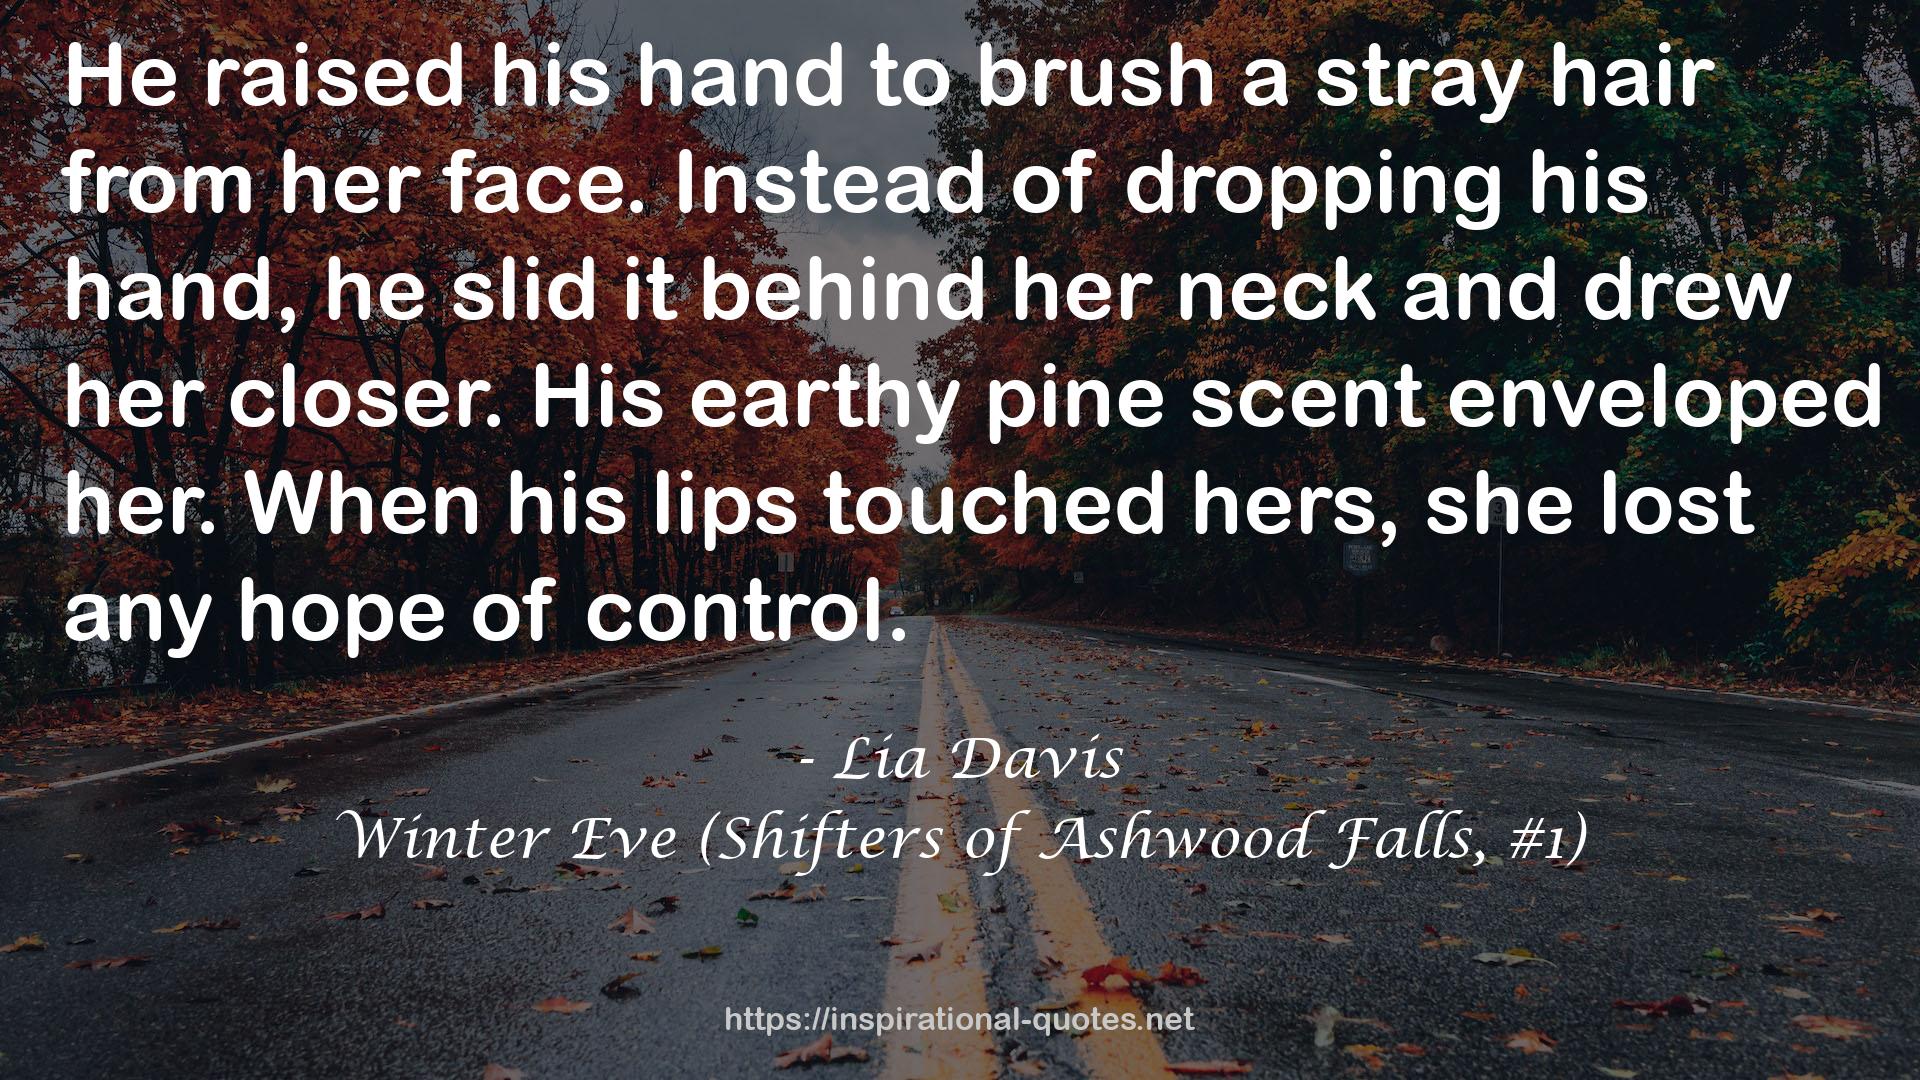 Winter Eve (Shifters of Ashwood Falls, #1) QUOTES